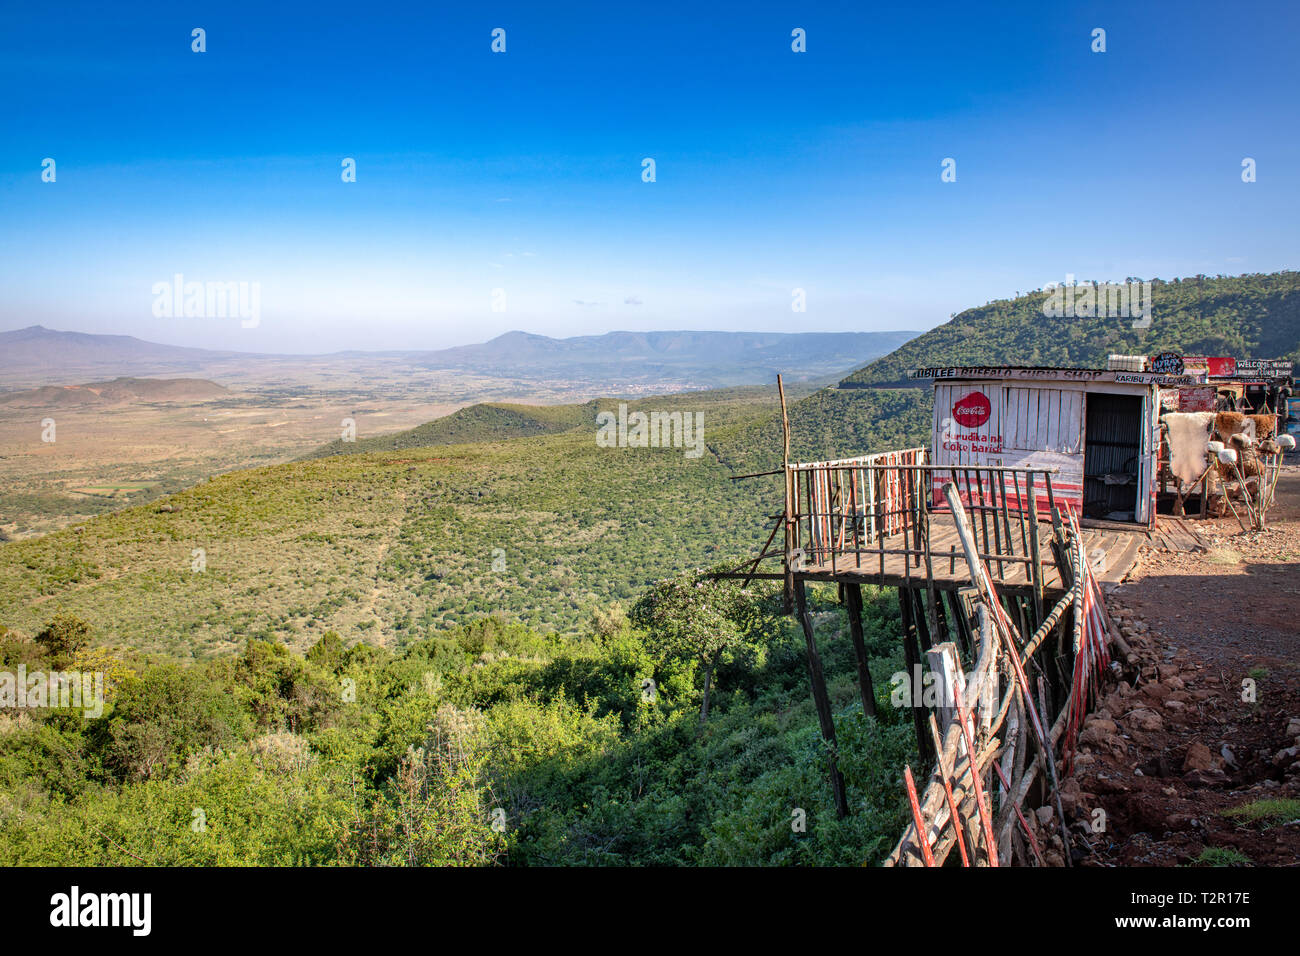 View overlooking the Great Rift Valley in Kenya Stock Photo